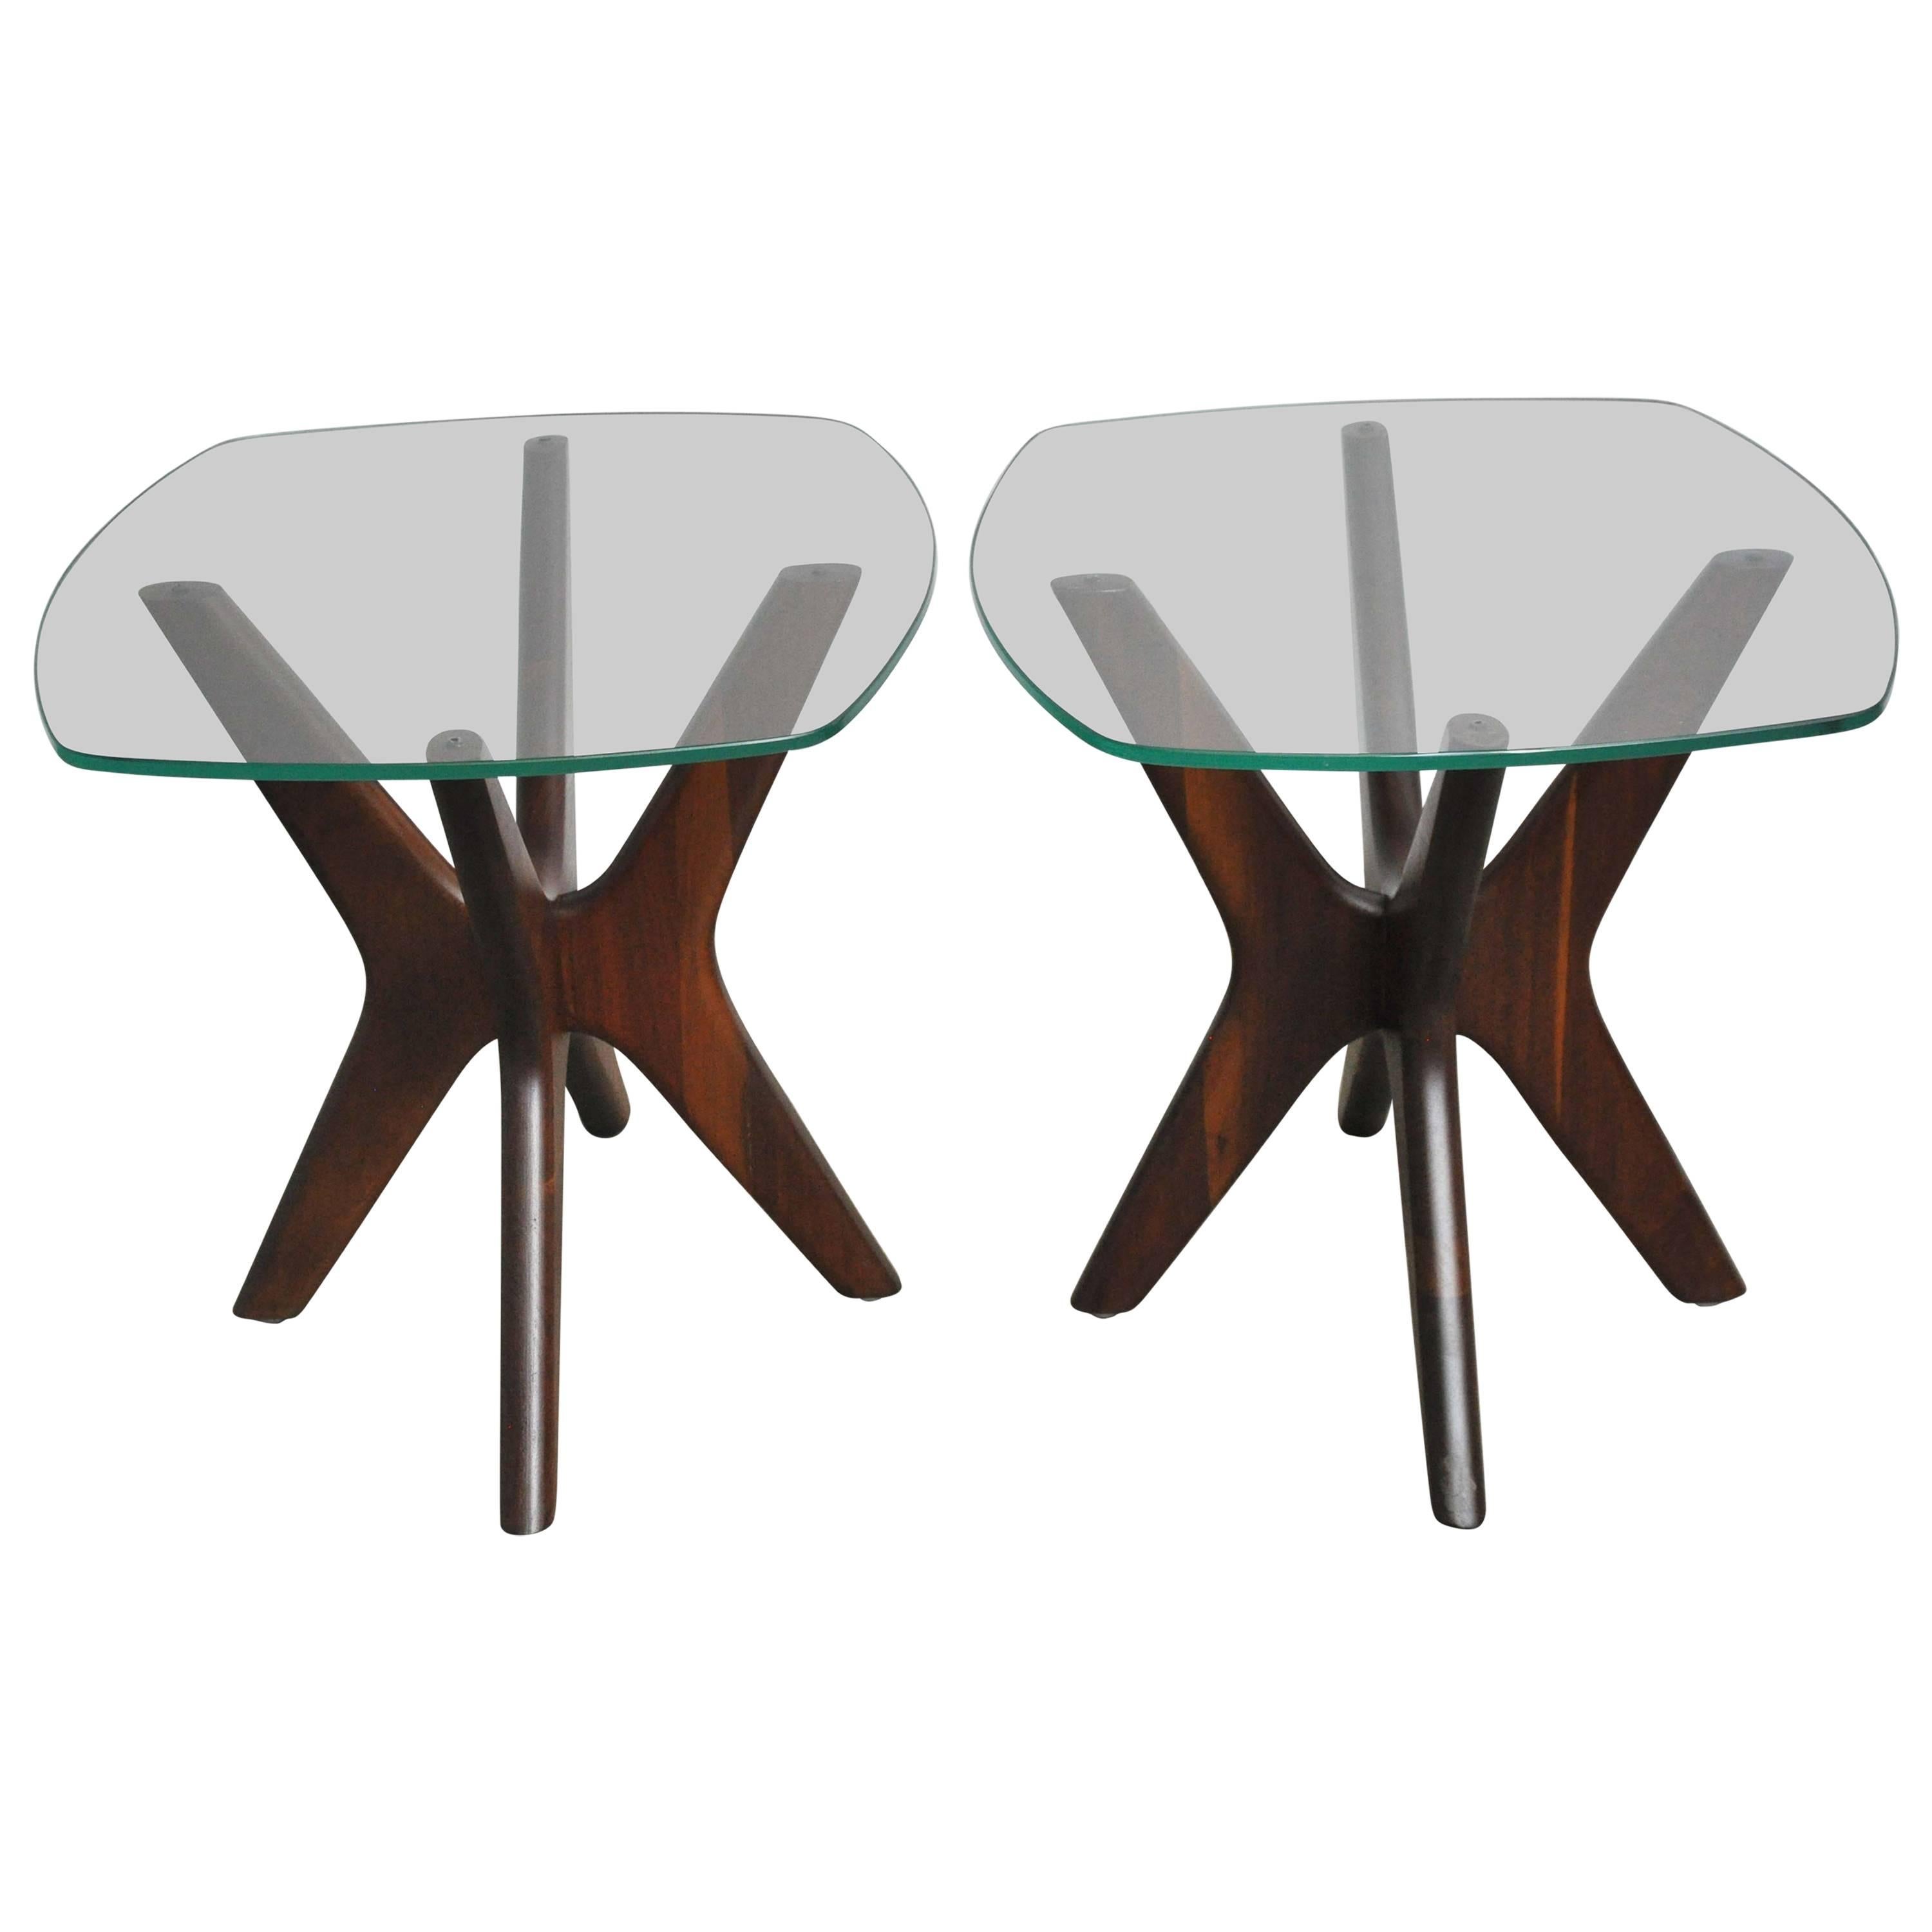 Adrian Pearsall Sculptural Walnut Side Tables